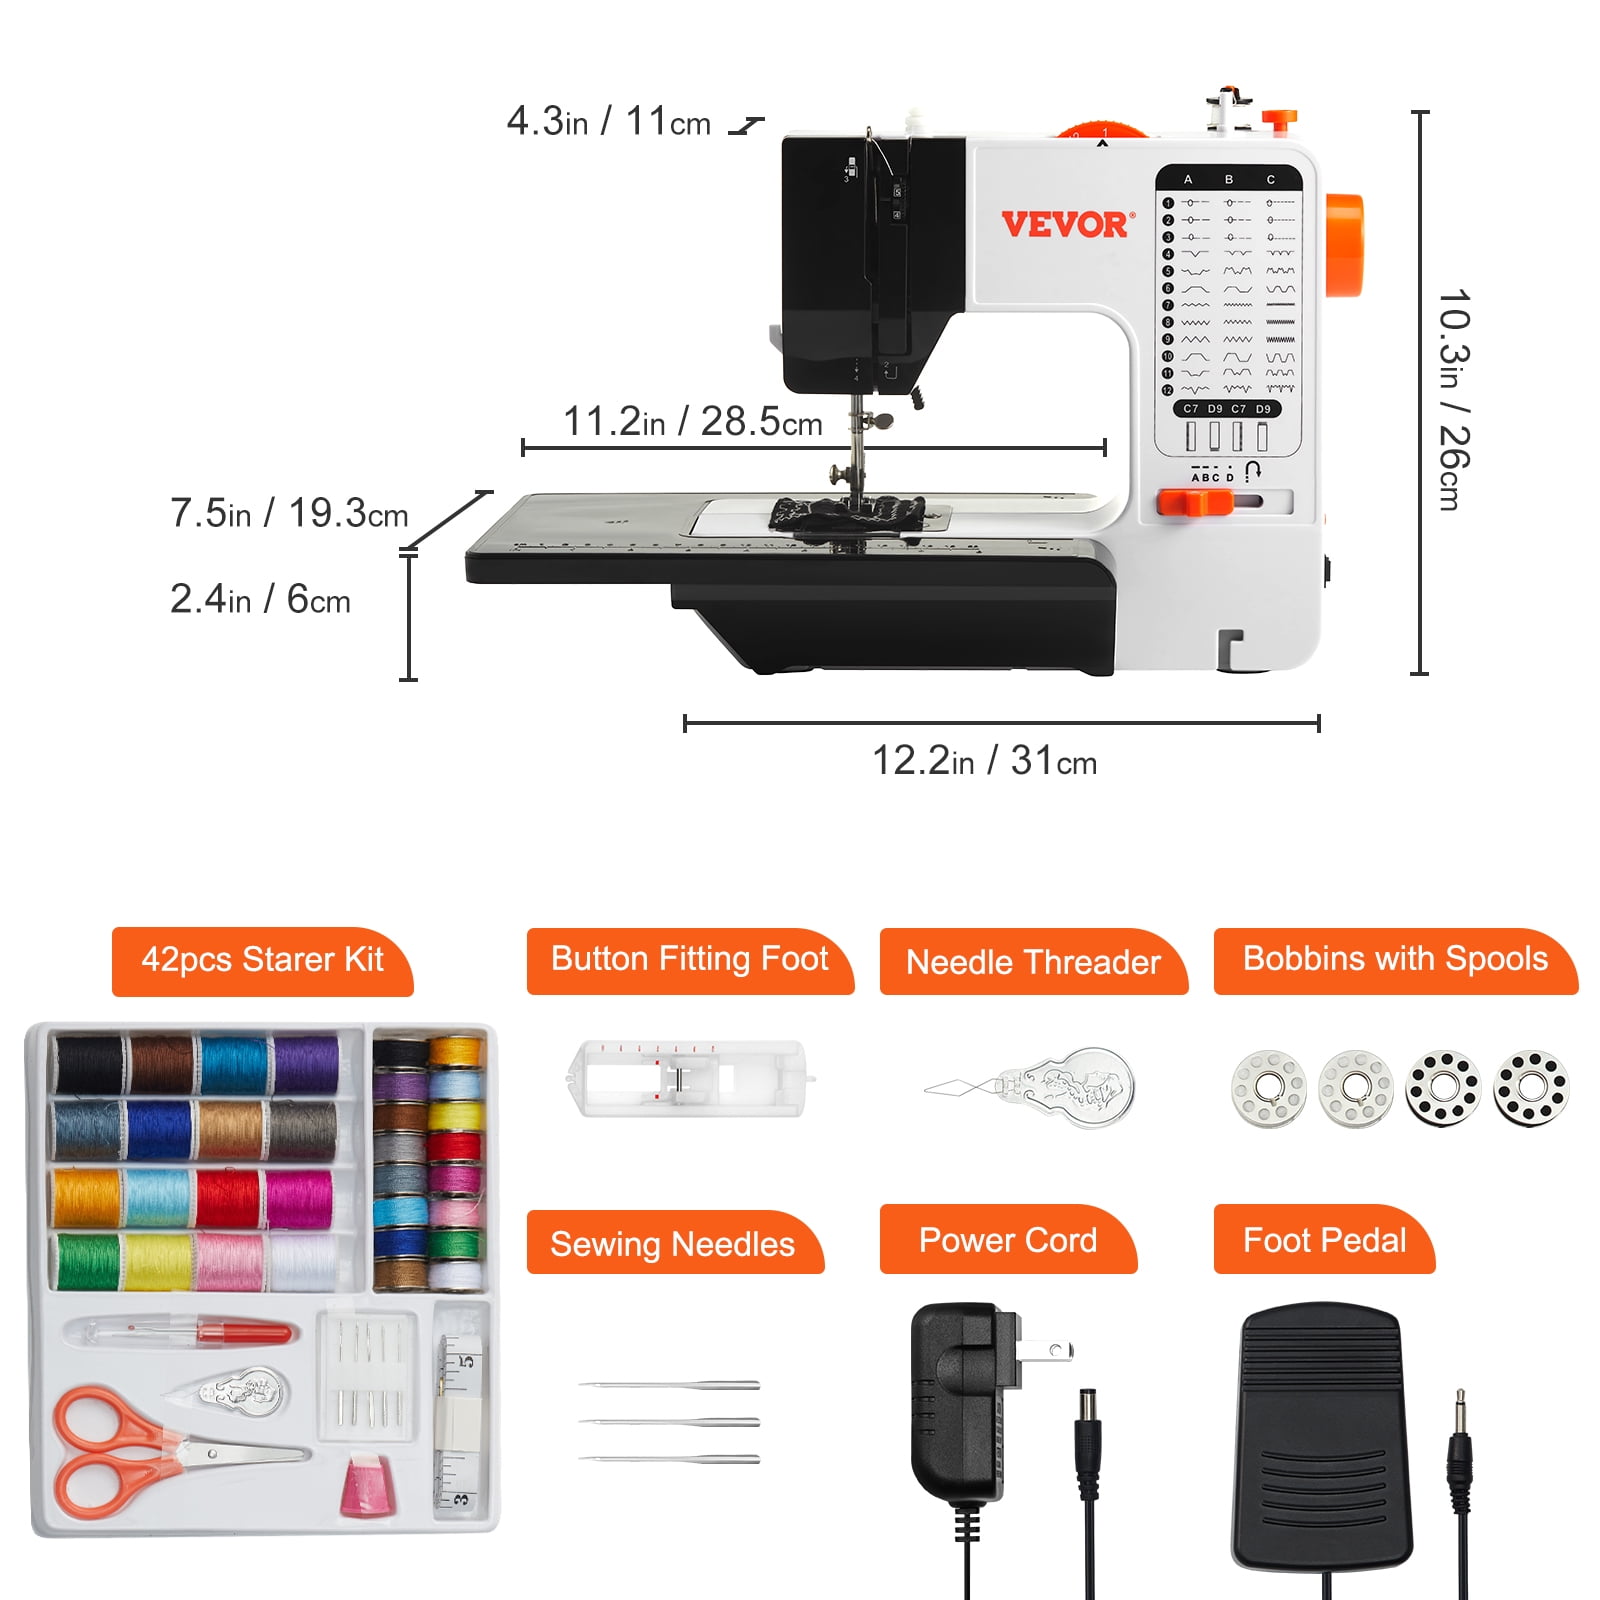 TALERLUV Sewing Machine for Beginners, Kids & Adults - 12 Stitch Applications, 7 Presser Feet, Extension Table, Foot Pedal, LED Light